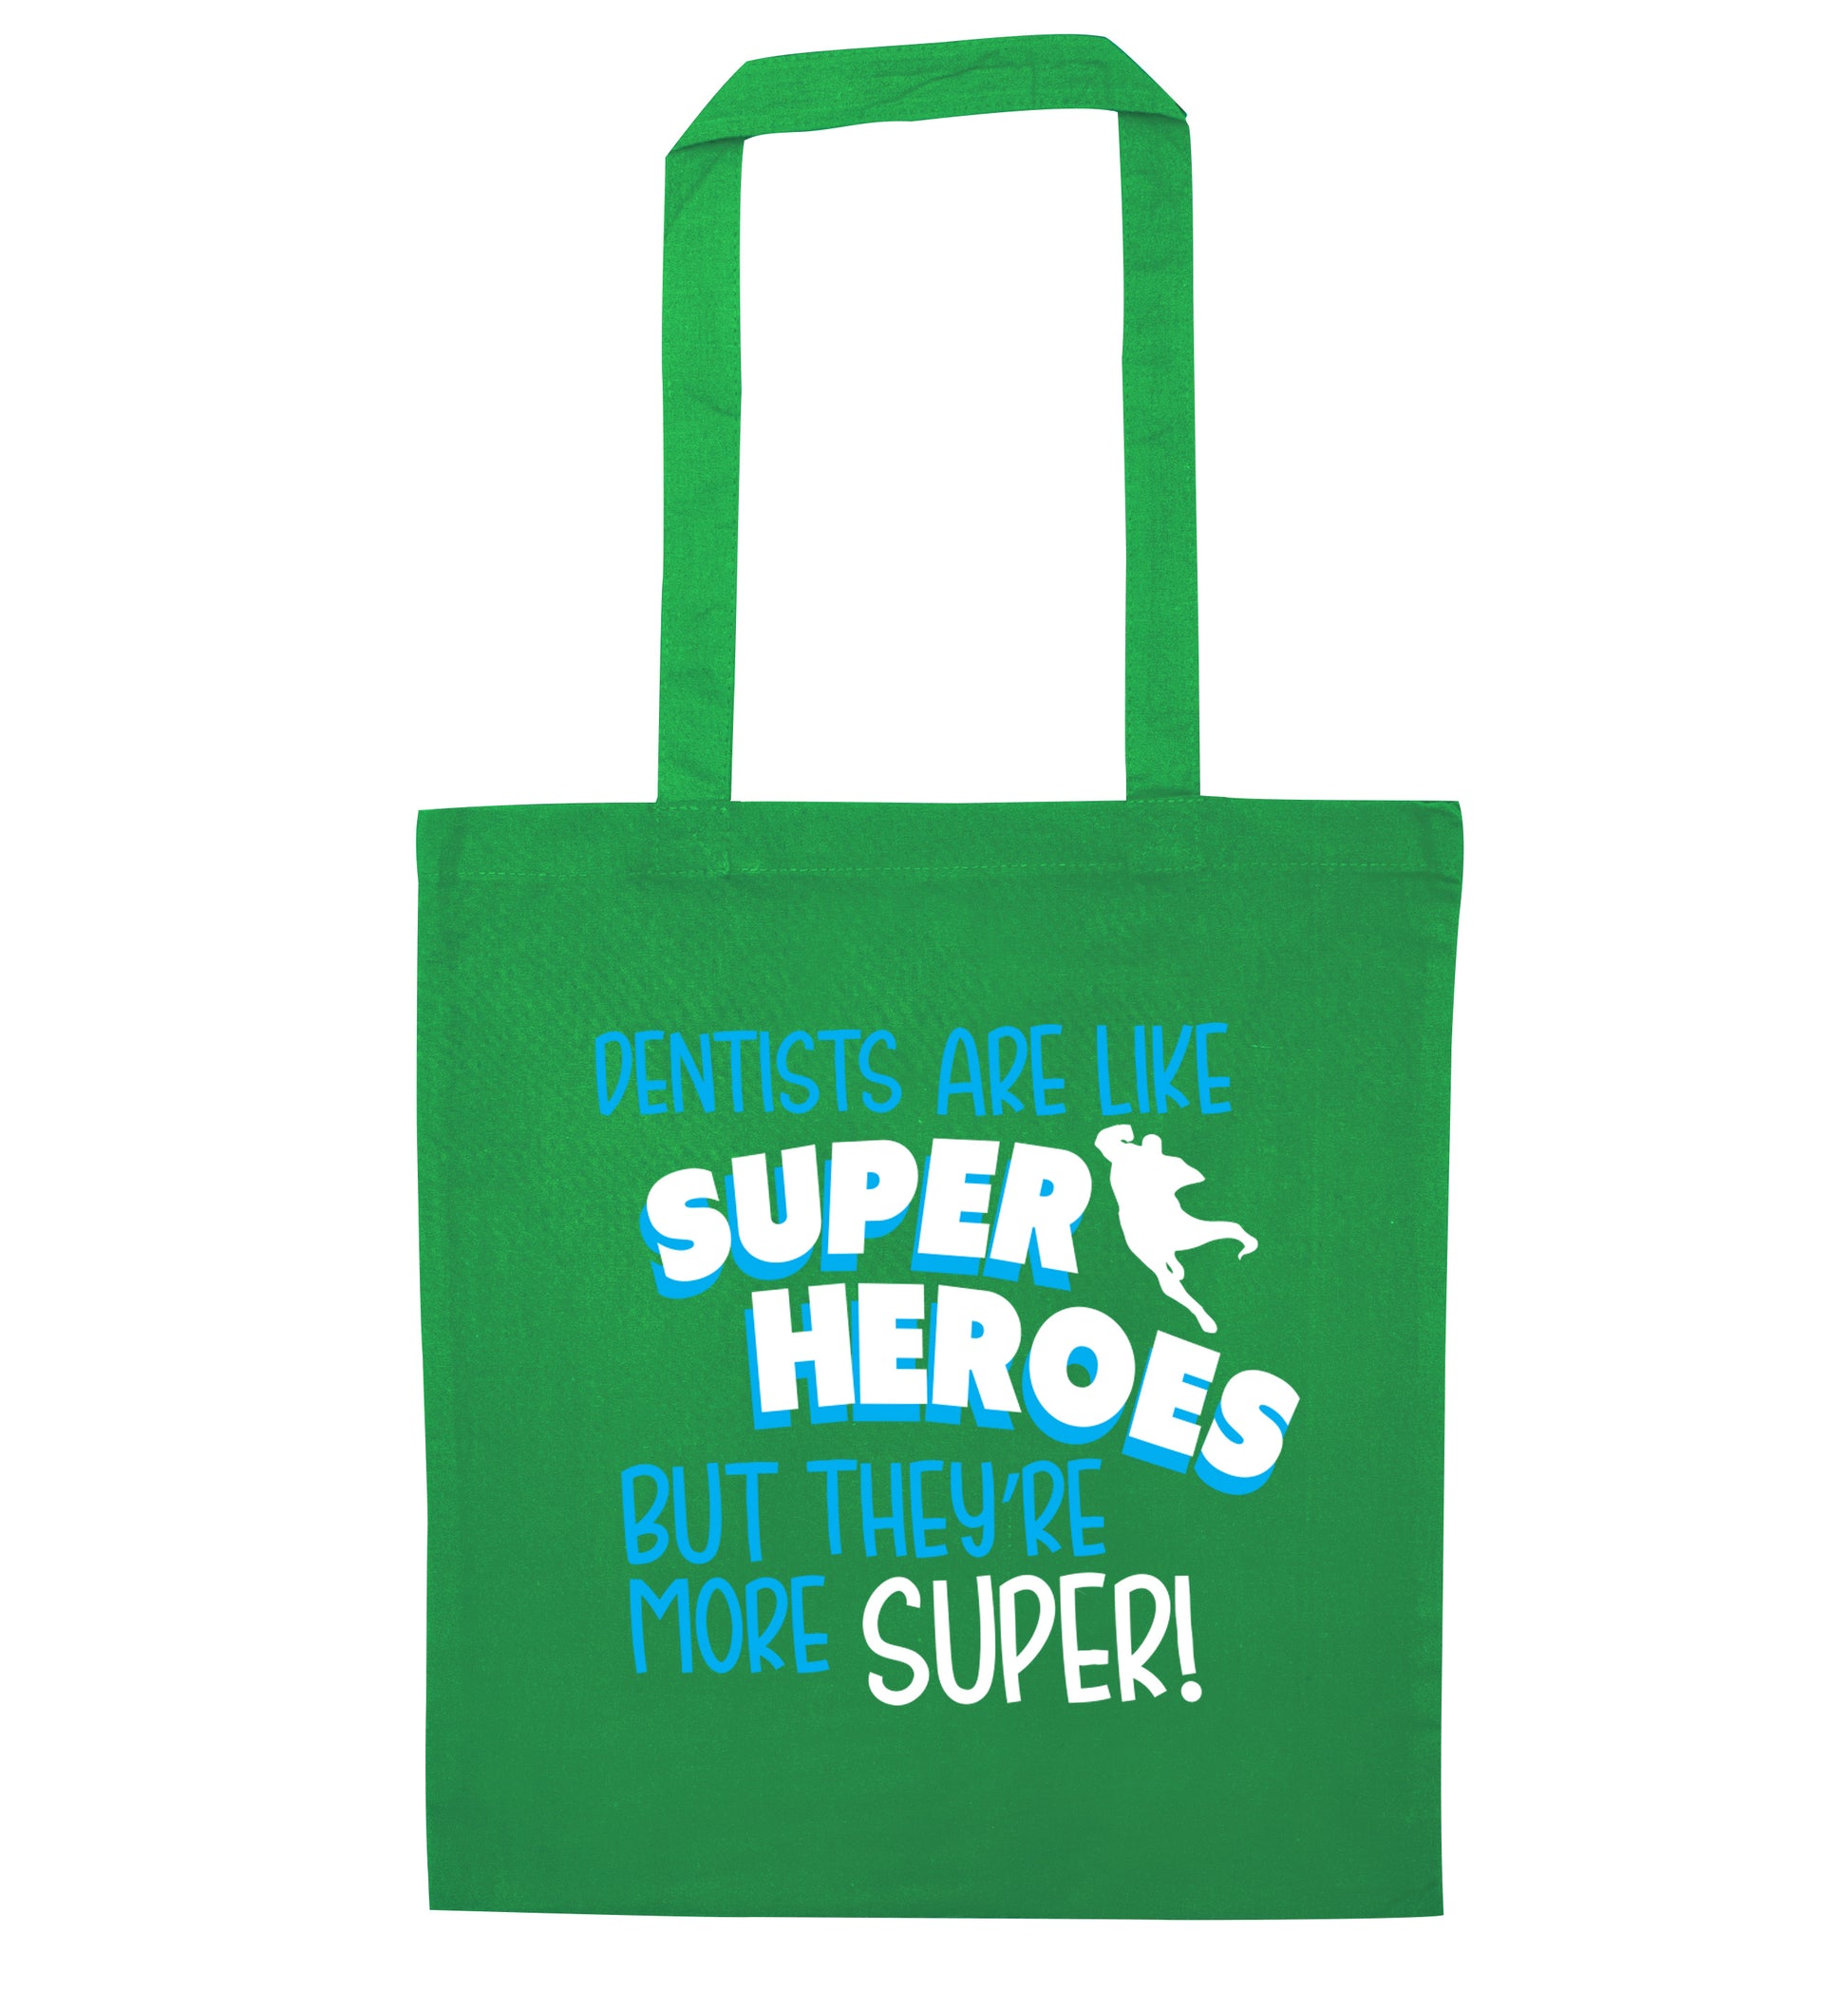 Dentists are like superheros but they're more super green tote bag